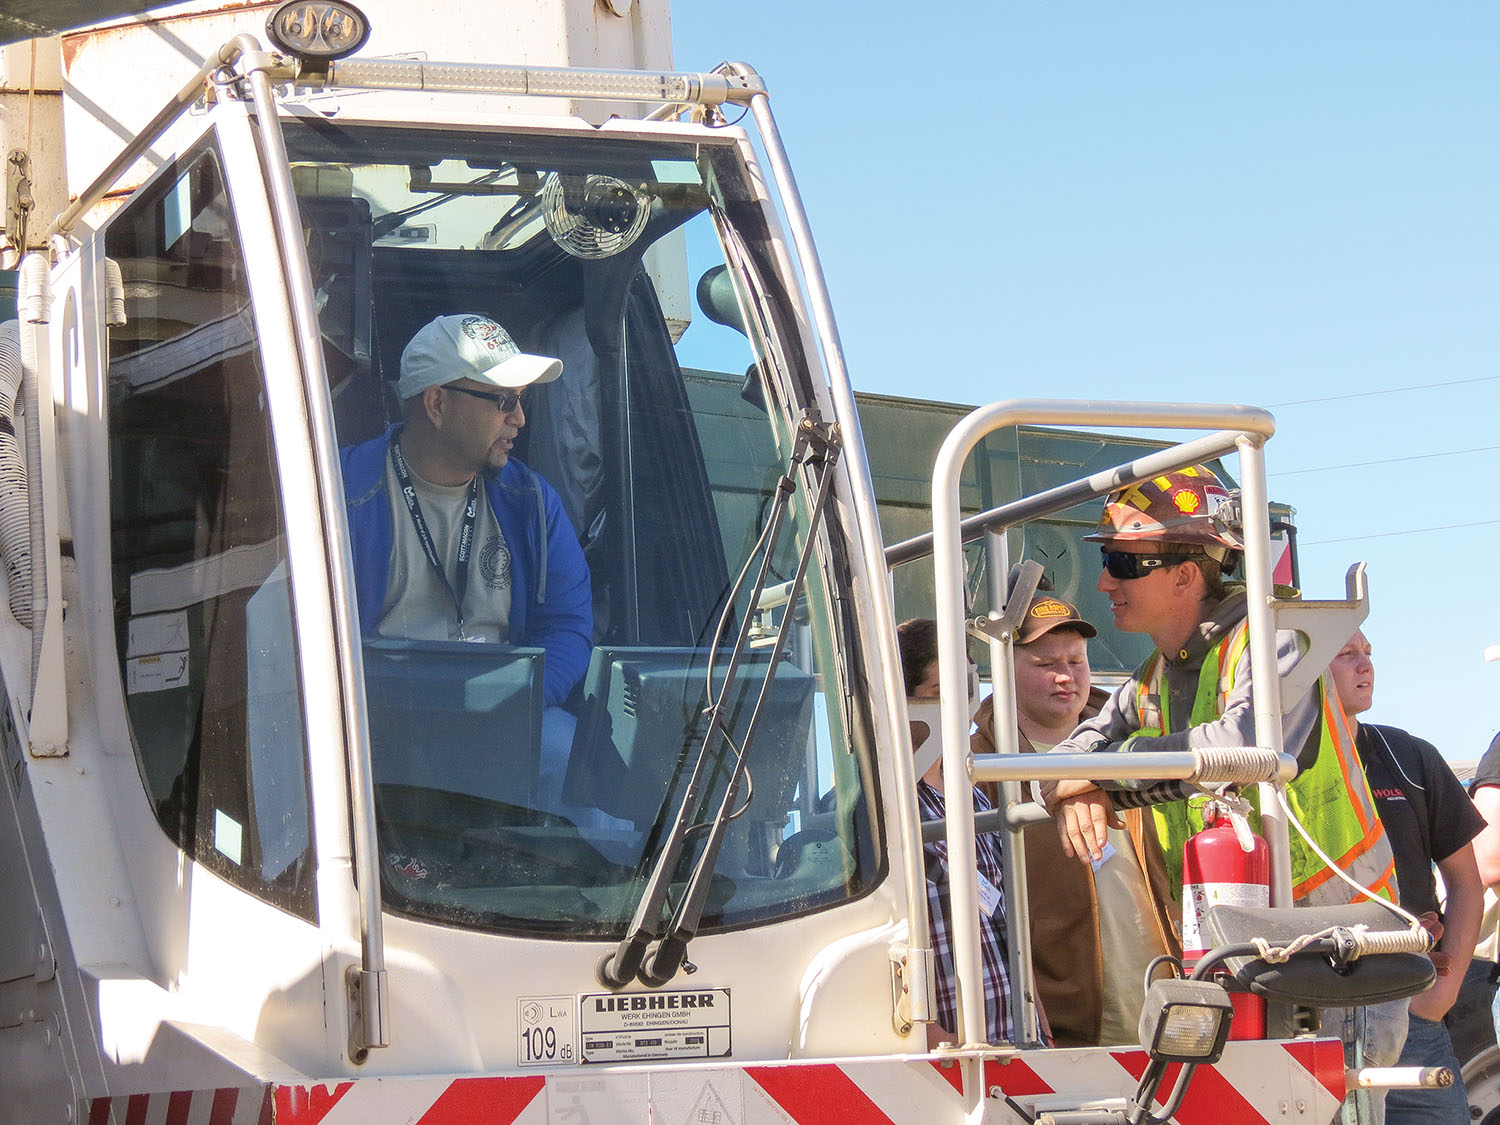 The National Commission for the Certification of Crane Operators (NCCCO) only recognized its potential role in workforce development when it became apparent that it was certifying a progressively aging population.